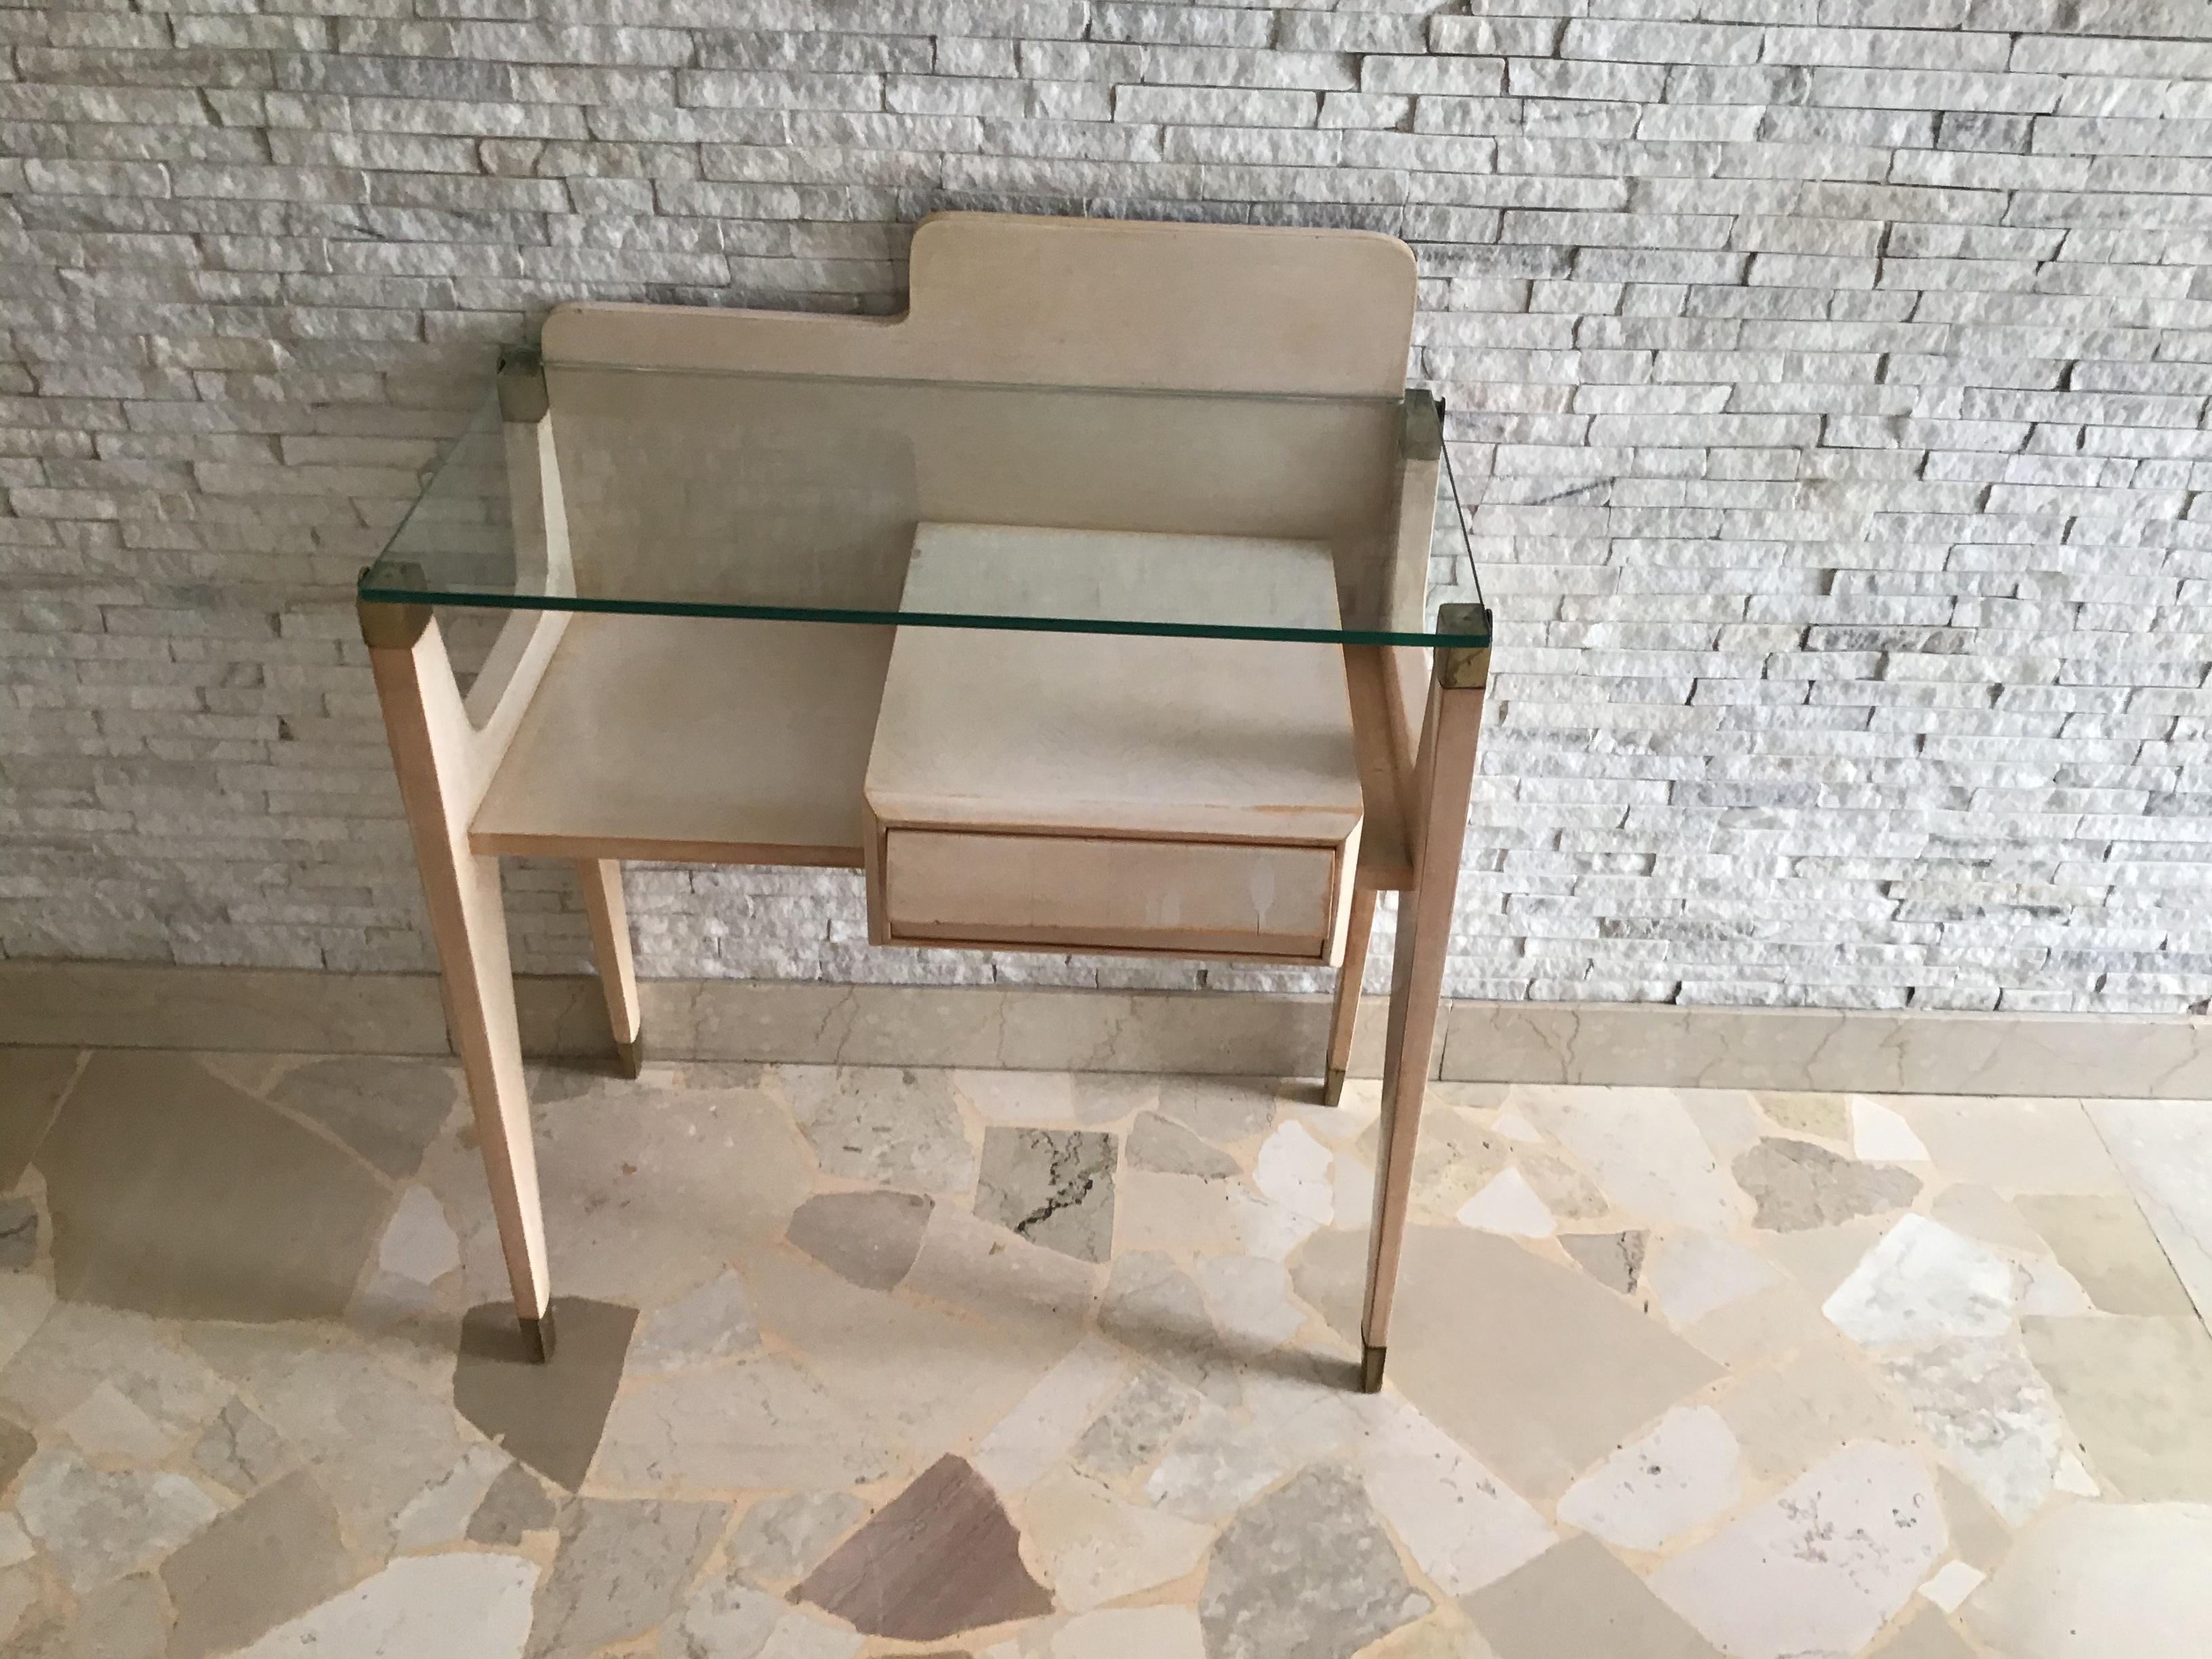 Mid-20th Century Gio’ Ponti “ Stile “ Bedside Tables Brass Wood Glass 1950 Italy  For Sale